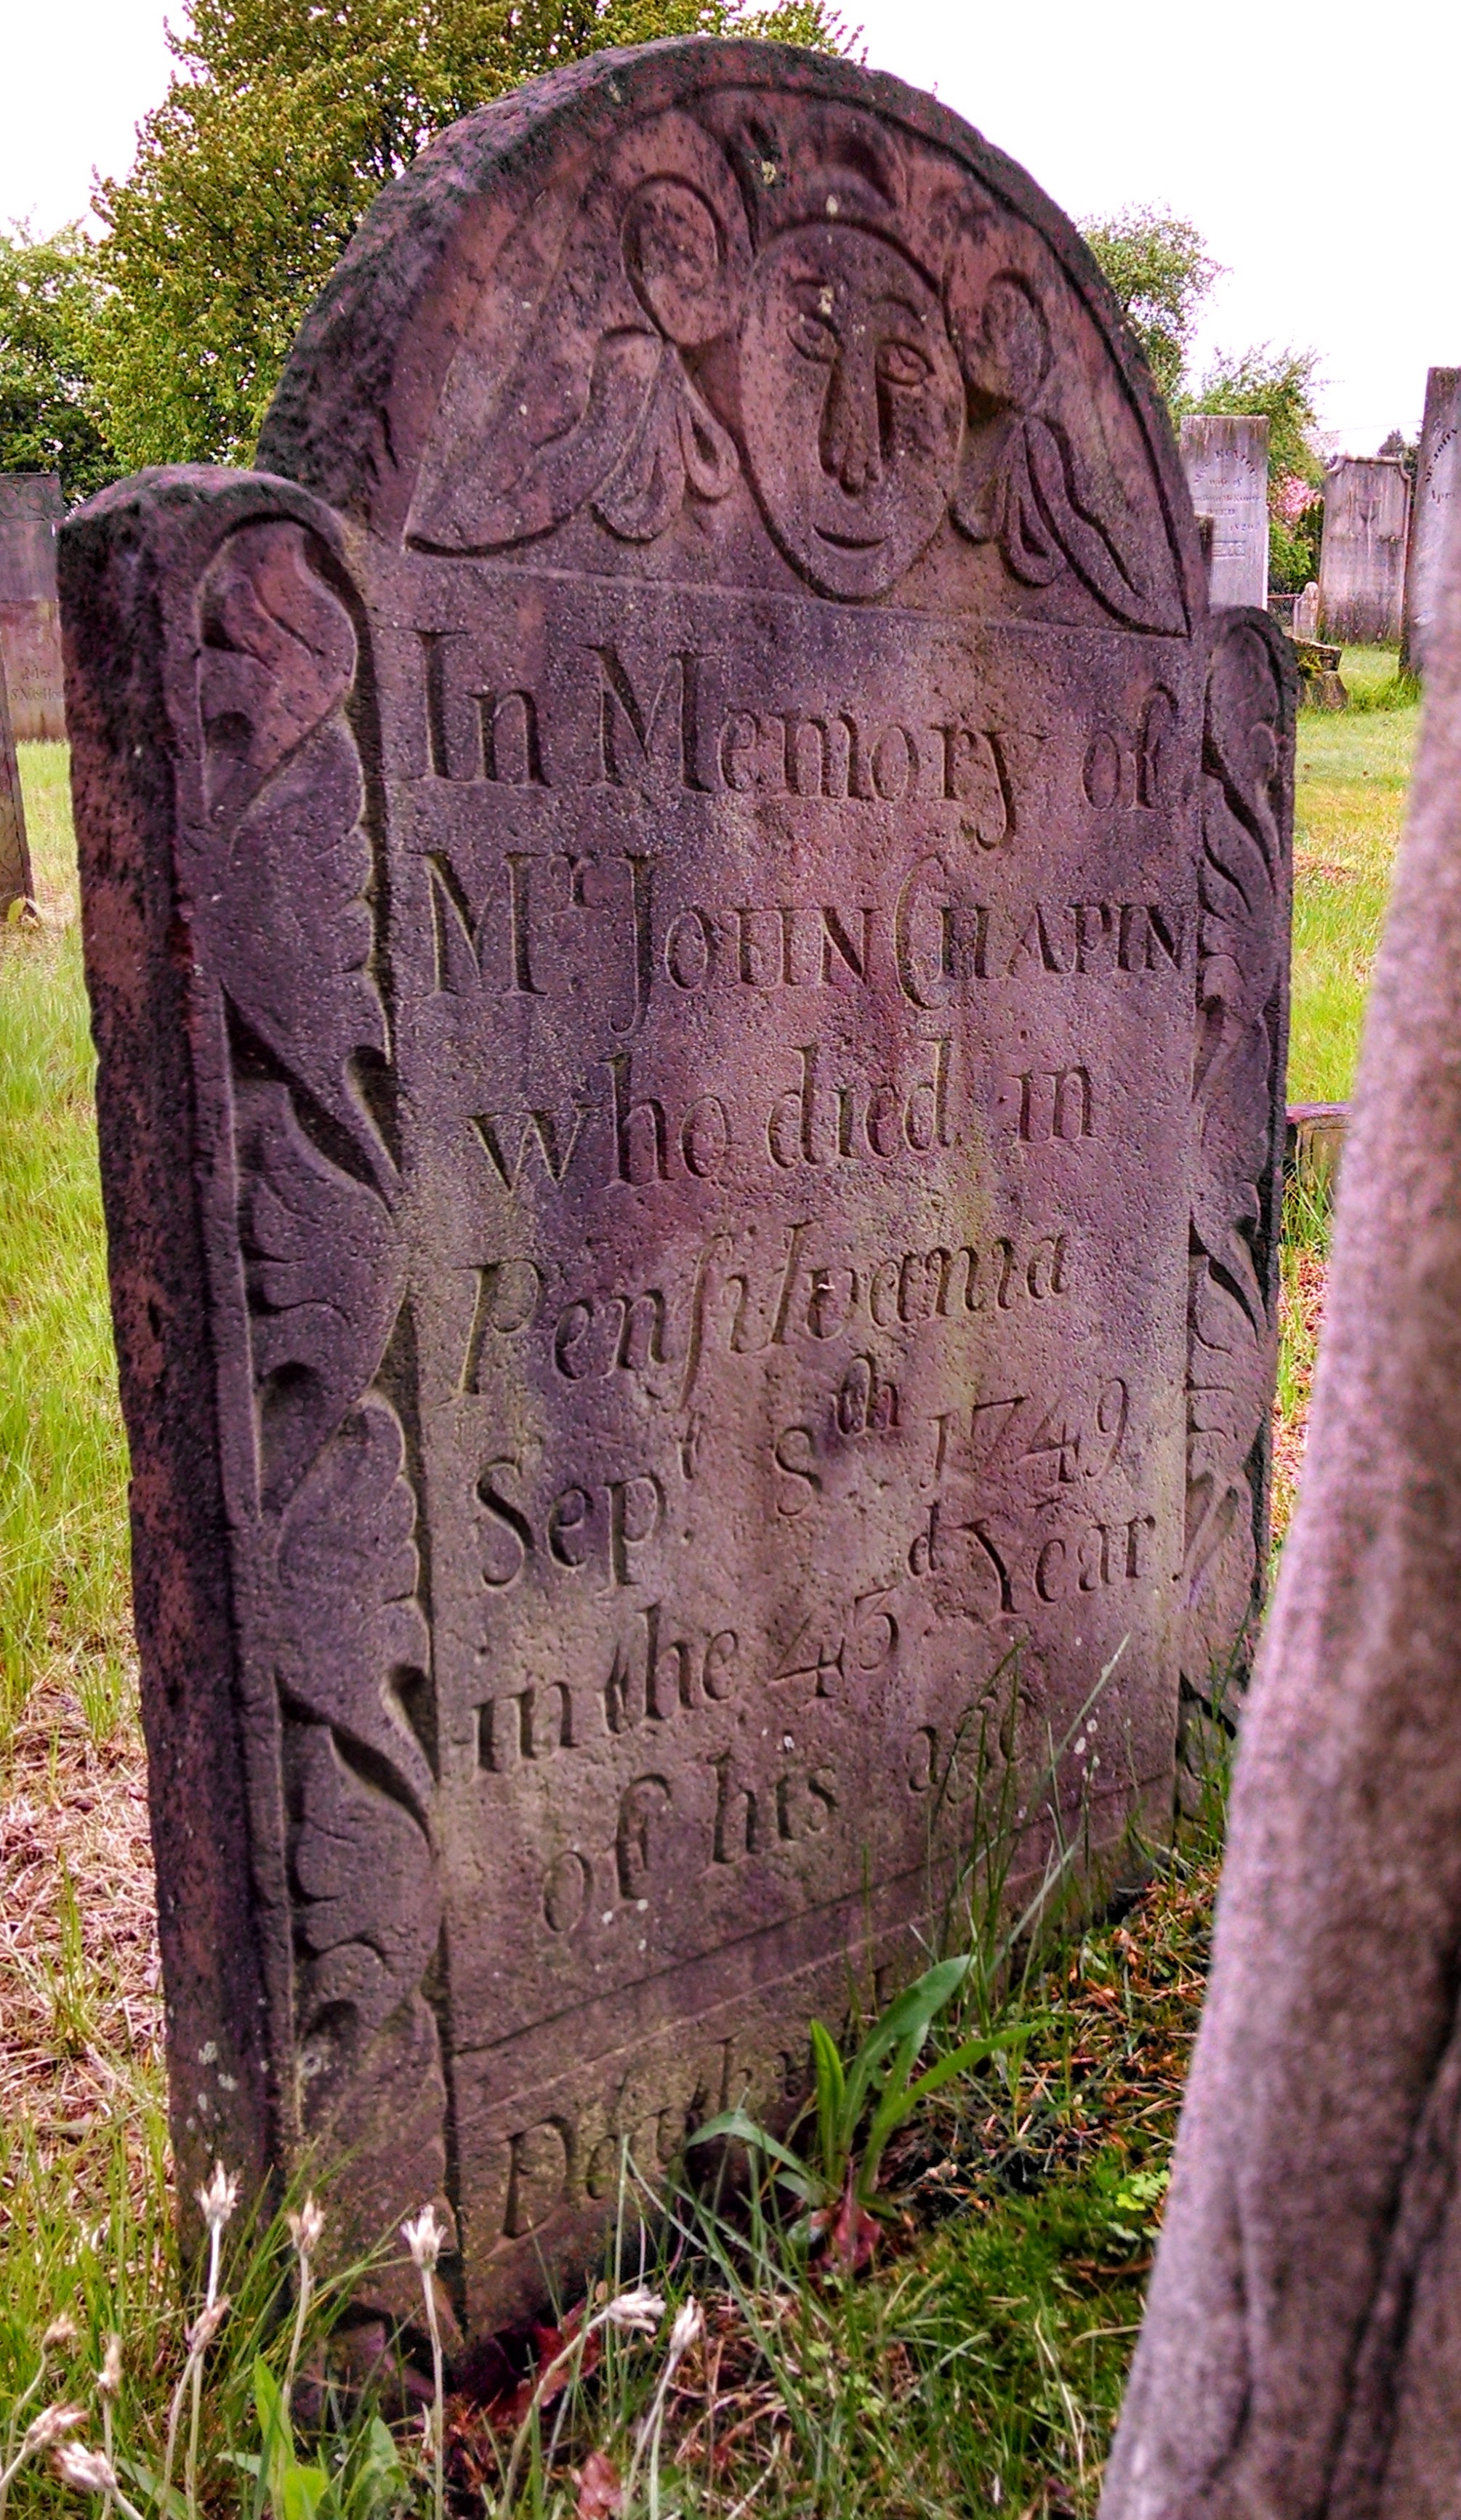 John Chapin, a descendant of the prominent Chapin family of Springfield, Mass, died in Pennsylvania as indicated on the stone. 